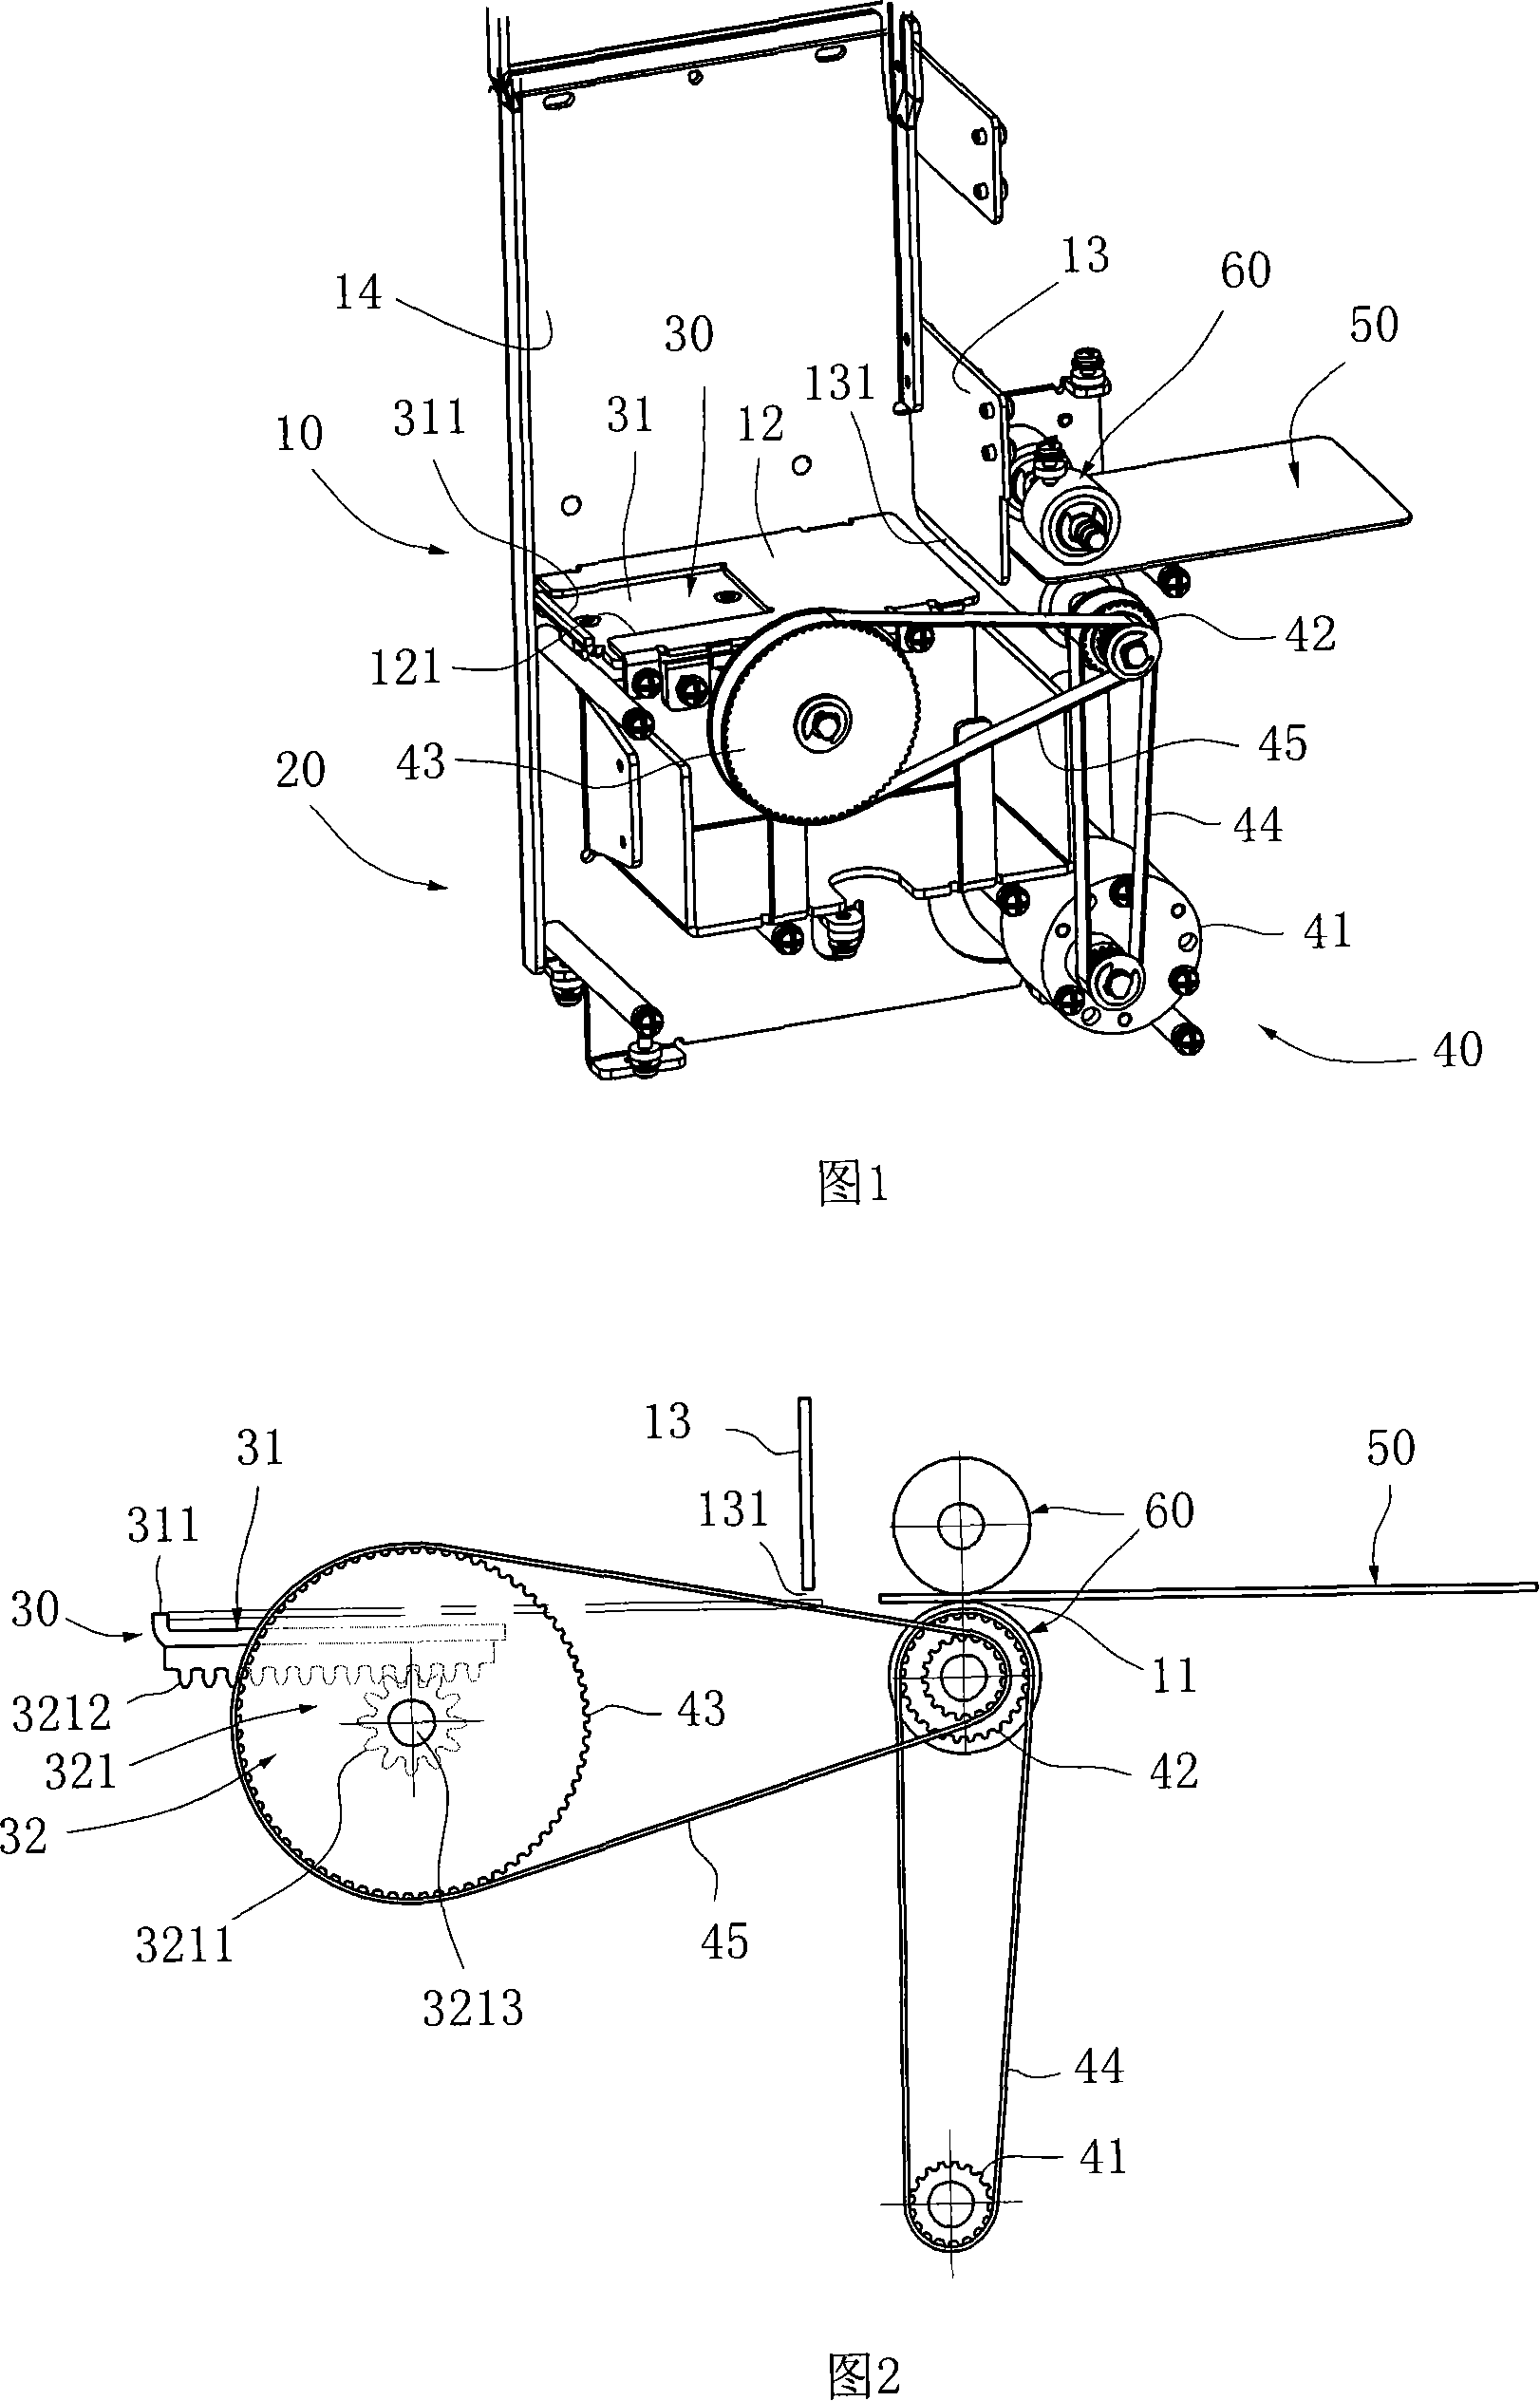 IC card pop-out device